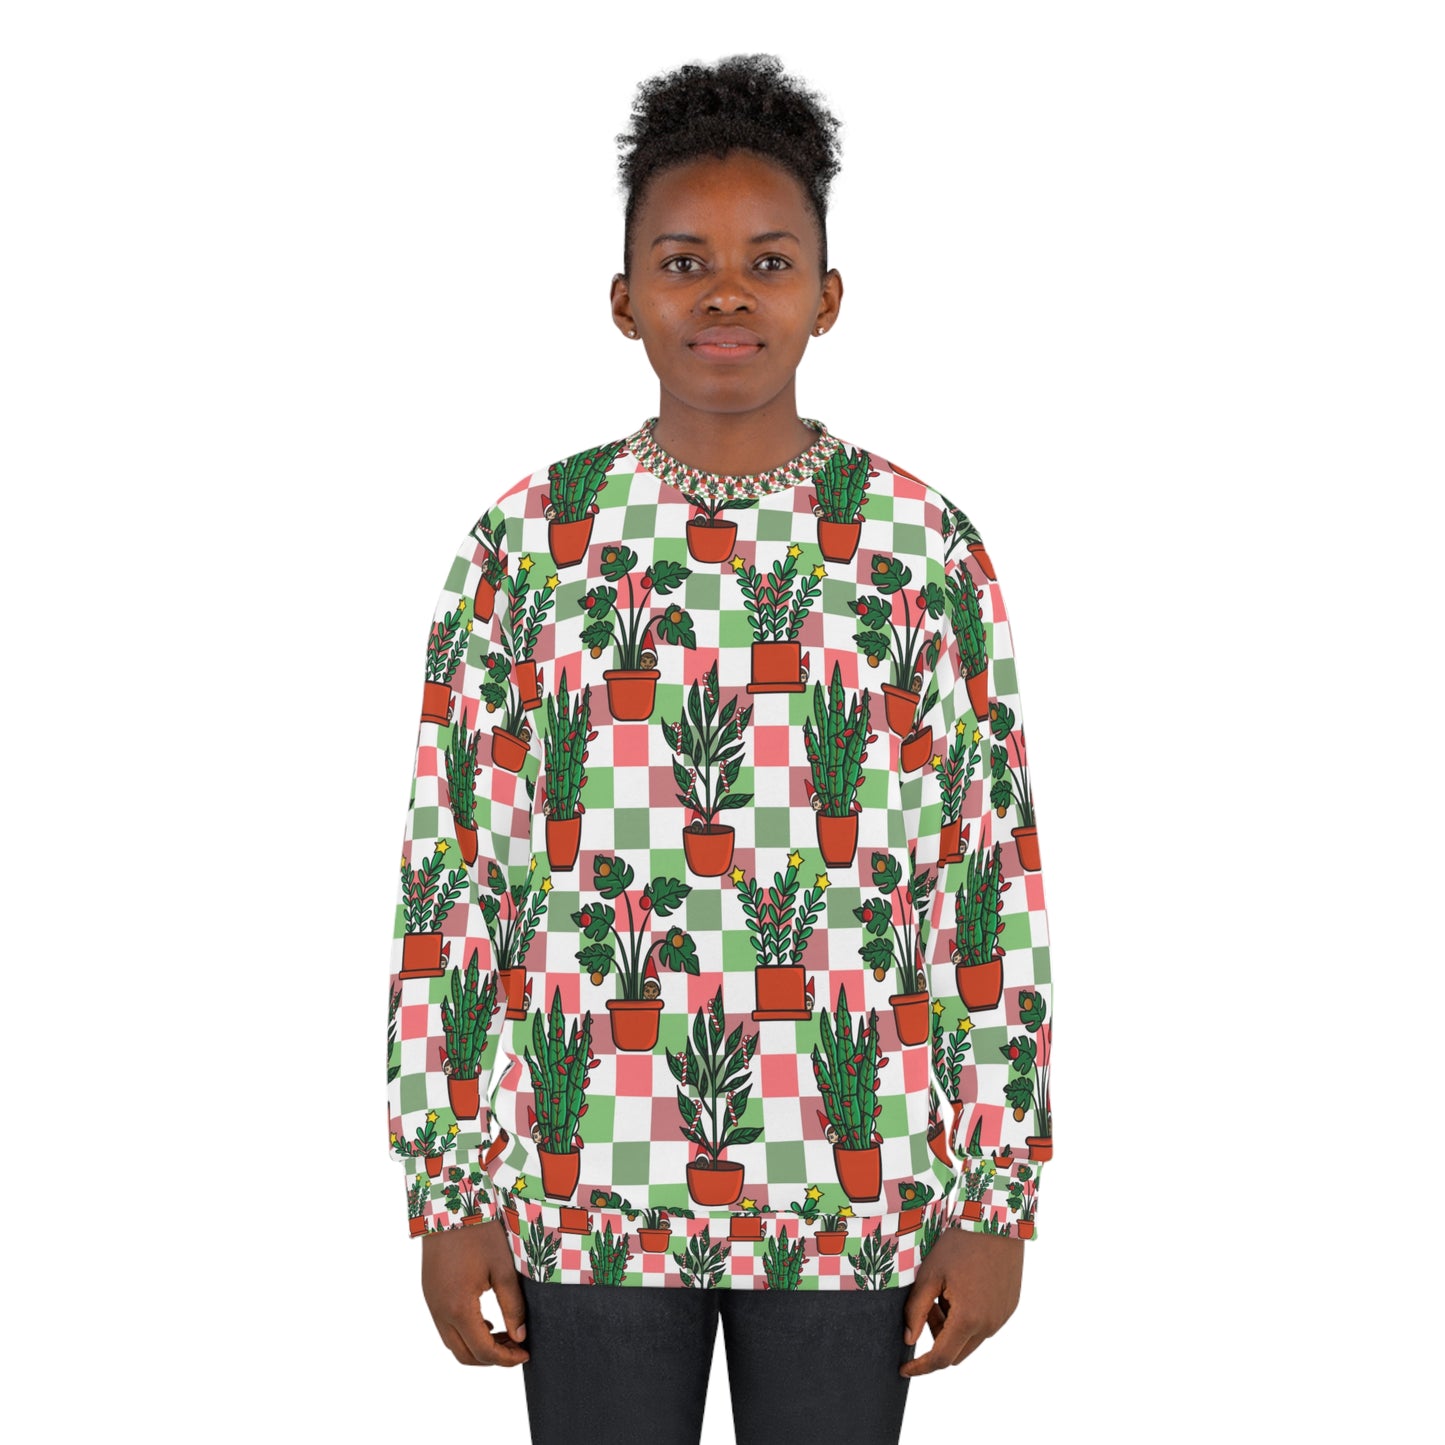 Christmas potted plants Unisex Sweatshirt for holiday season.Christmas ugly sweater for plant lover.